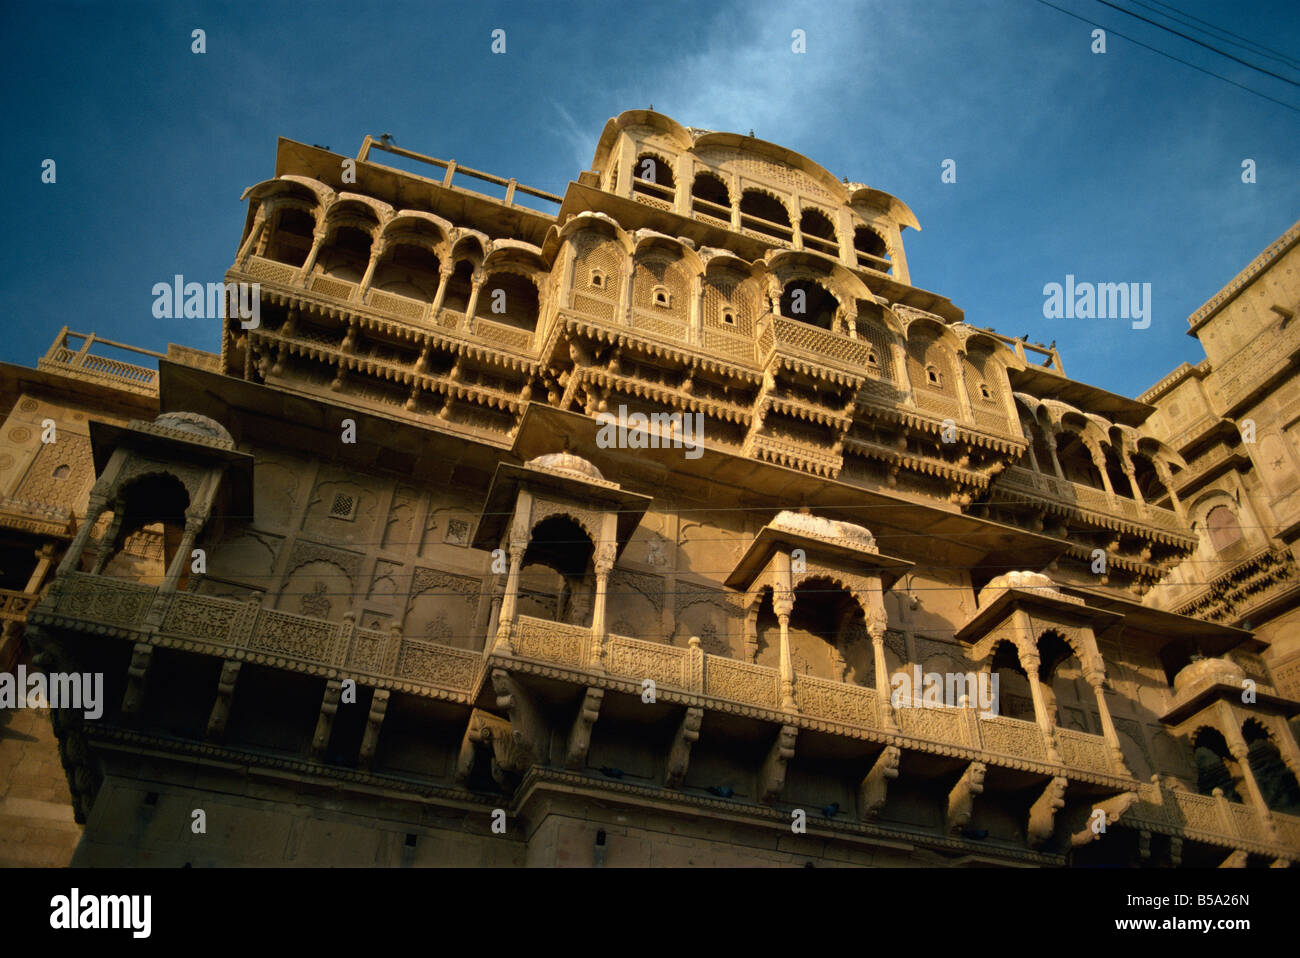 View of the Fort Palace built by Rawal Jaisal in 1156 Jaisalmer Fort Jaisalmer Rajasthan state India Asia Stock Photo